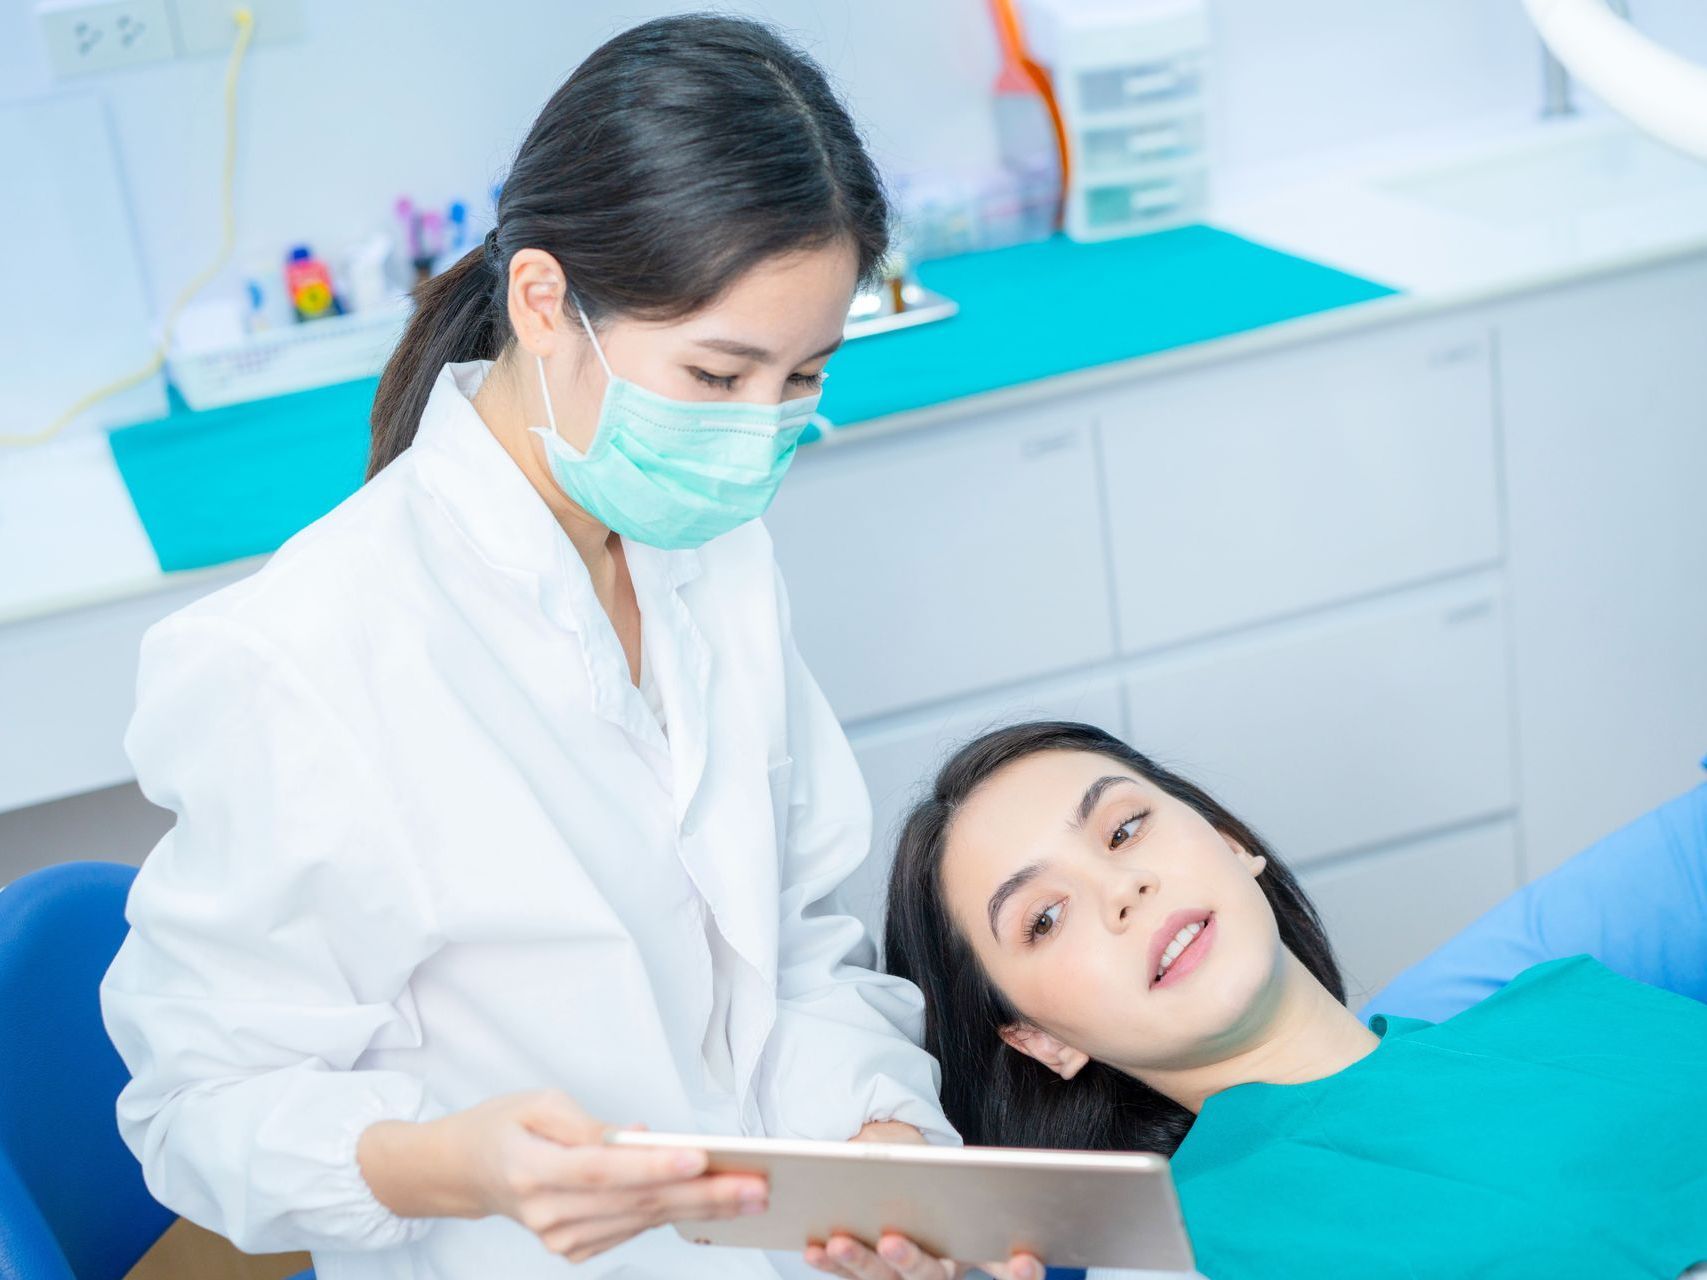 An image of a female dentist showing a tablet to a female patient